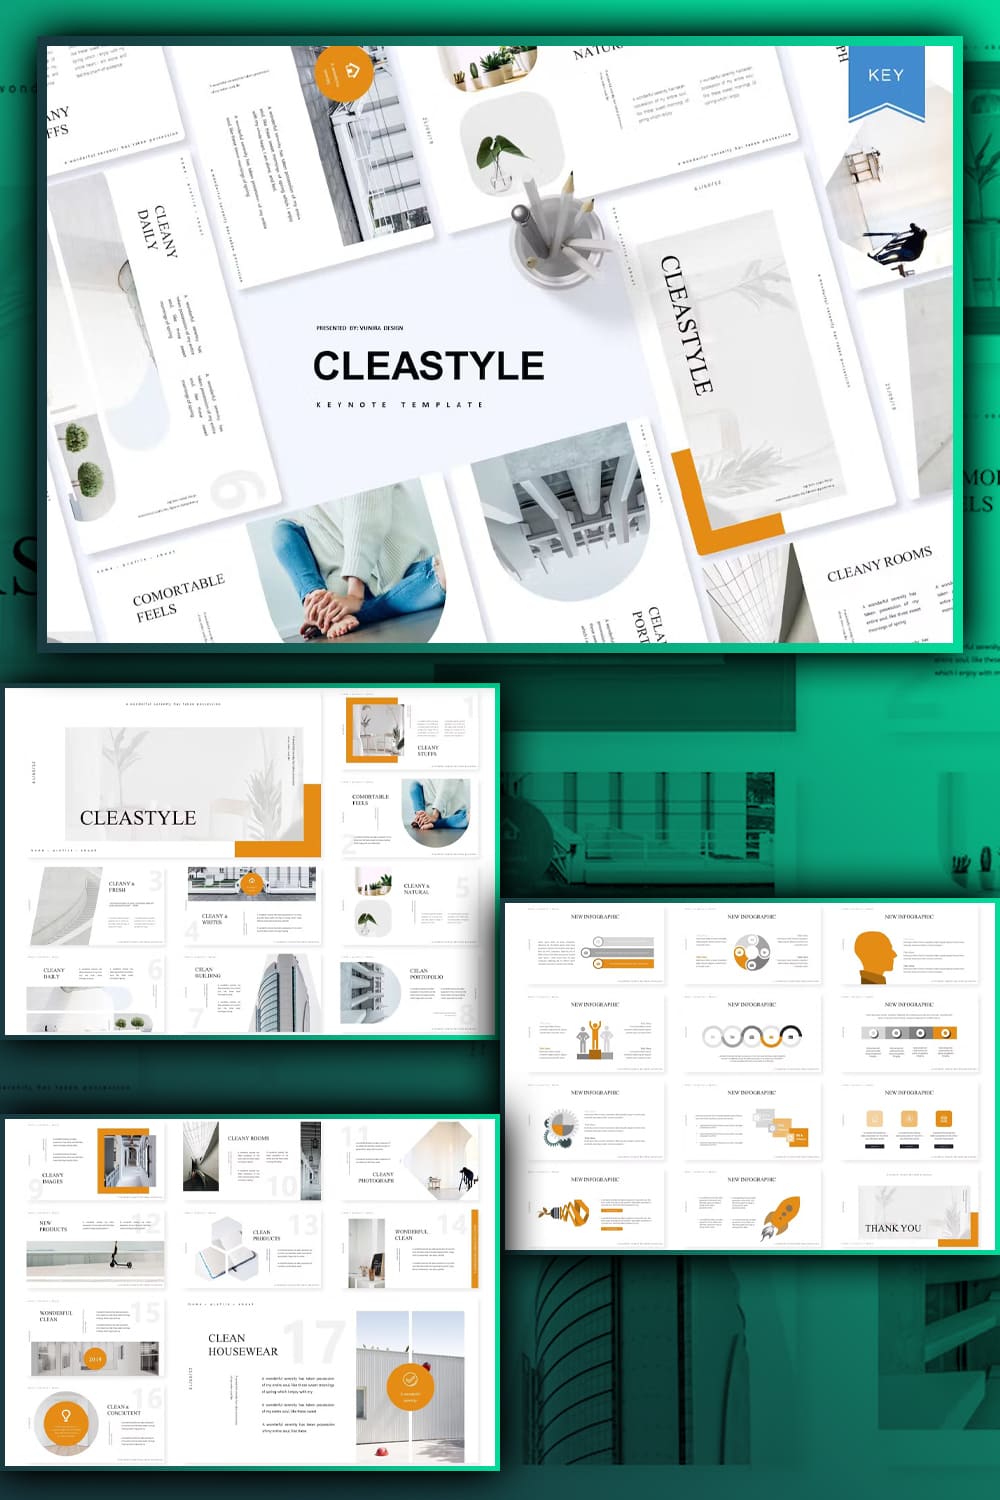 Cleastyle keynote template, image for pinterest 1000x1500.